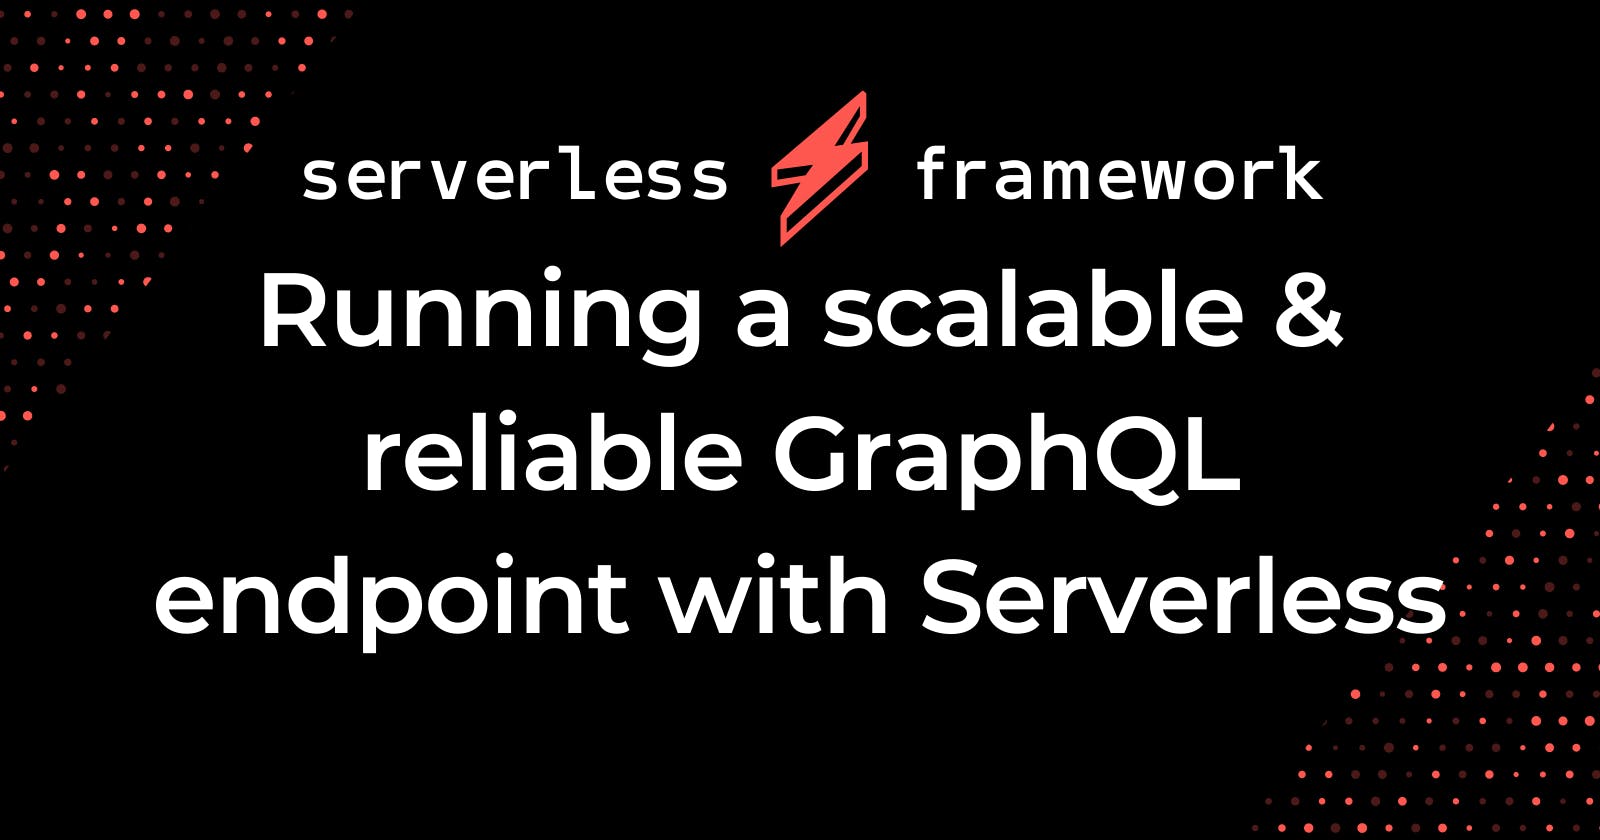 Running a scalable & reliable GraphQL endpoint with Serverless